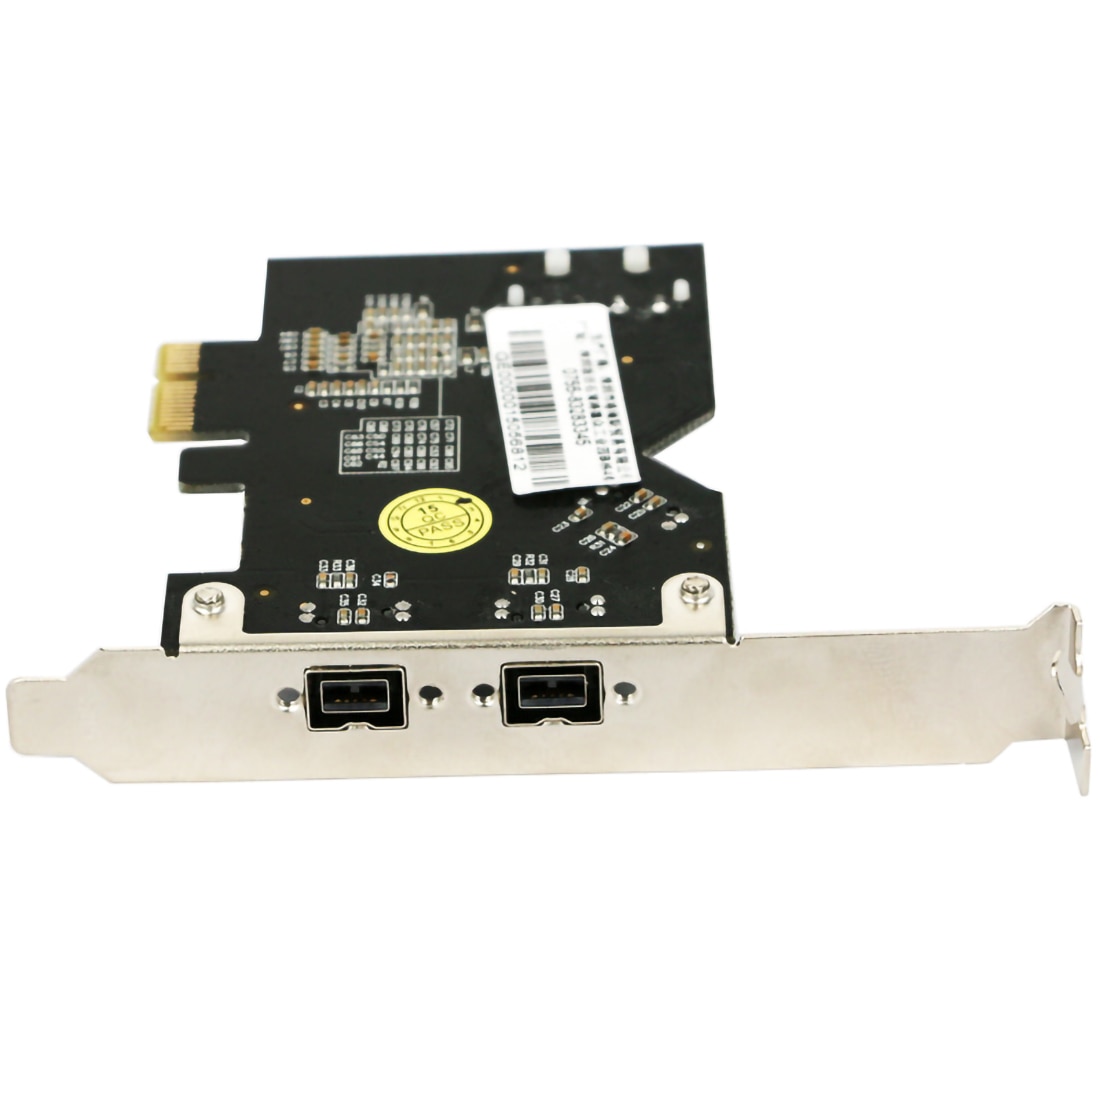 PCI Express PCI-E x1 to 3 Ports 1394B Controller Card Add On Card for FireWire 800 IEEE 1394 B 2+1 Digital Camera Video Capture